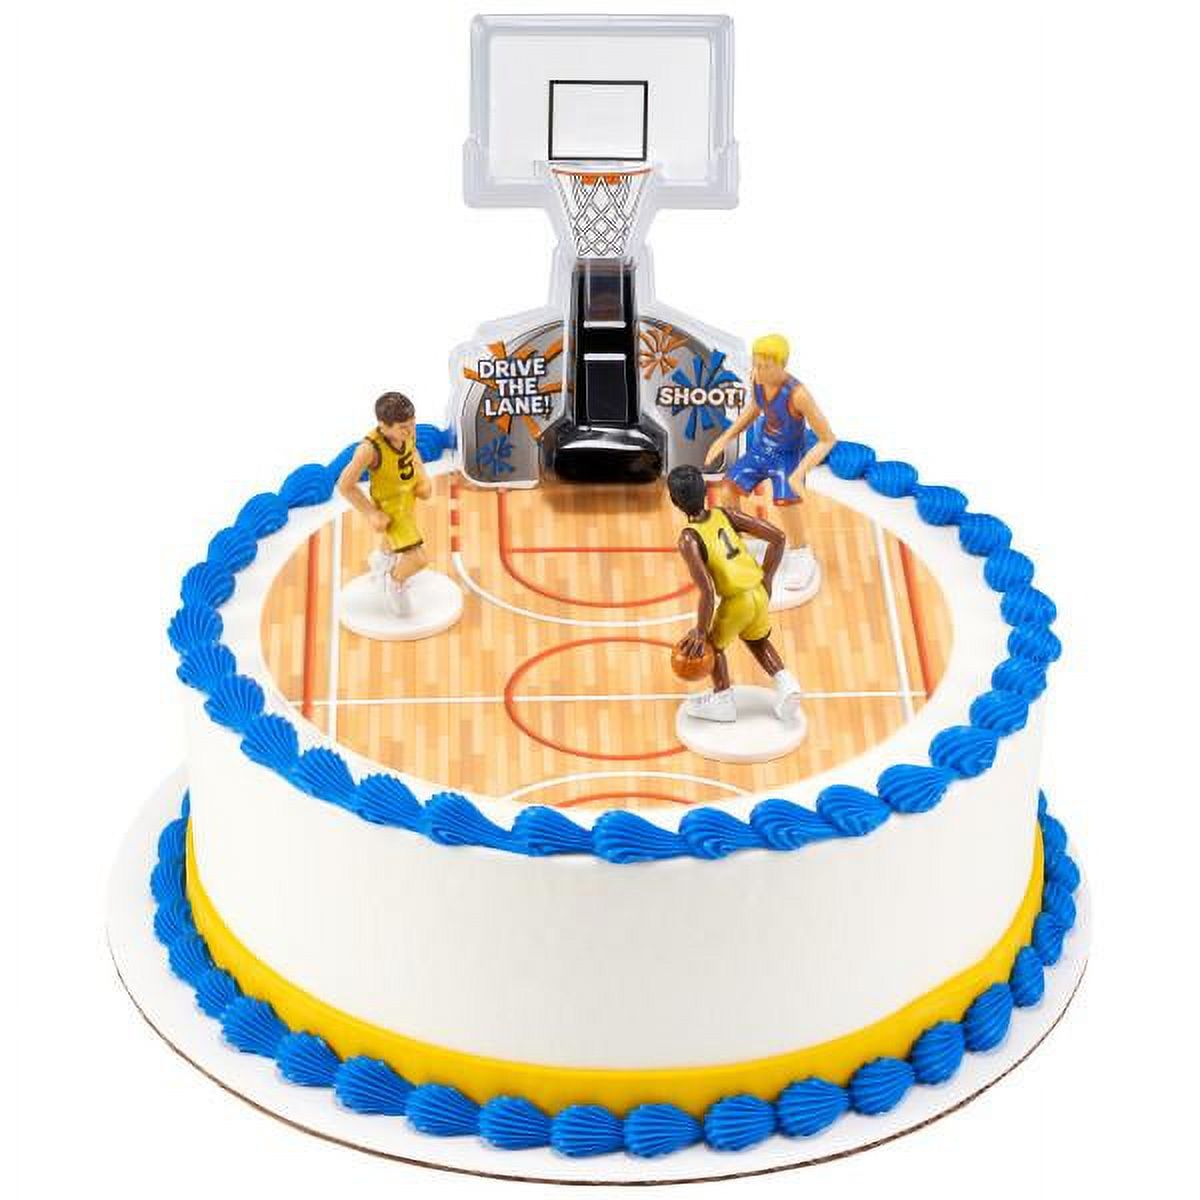 Basketball All Net DecoSet with Round Edible Cake Topper Image Background - image 1 of 2